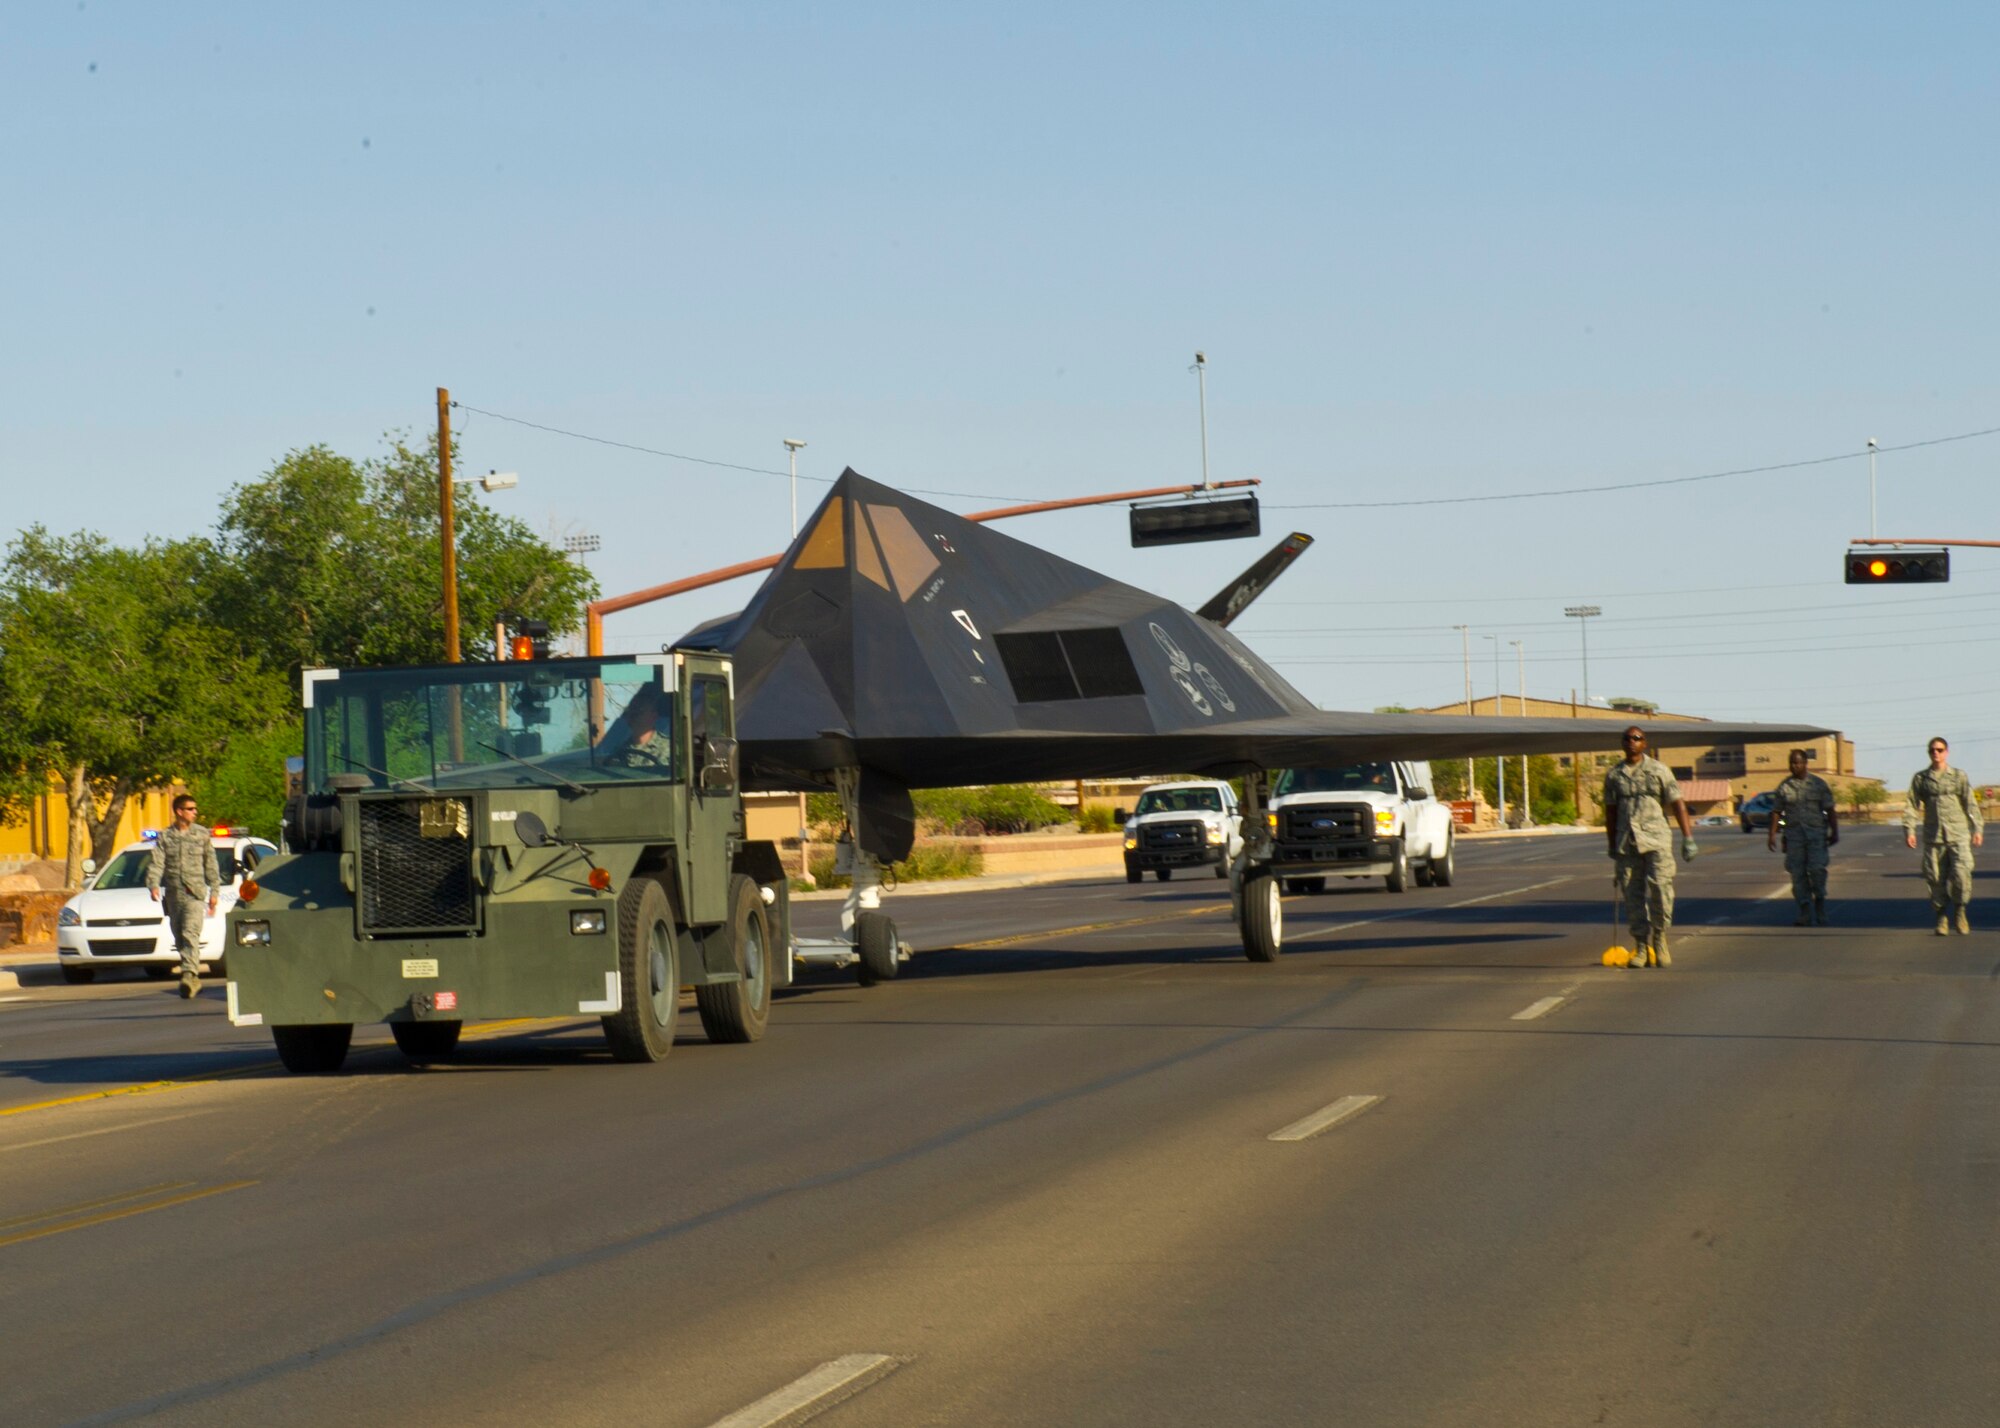 Members of Team Holloman walk along side the F-117 Nighthawk down First Street at Holloman Air Force Base, N.M., June 28. The F-117 has been on static display in Holloman’s Heritage Airpark since its retirement in 2008. Due to sun and inclement weather damage, the 49th Maintenance Squadron removed and towed the aircraft to begin the restoration process. The aircraft received structural maintenance, and a fresh paint job before it was returned for display in Heritage Airpark. (U.S. Air Force photo by Airman 1st Class Leah Ferrante/Released)